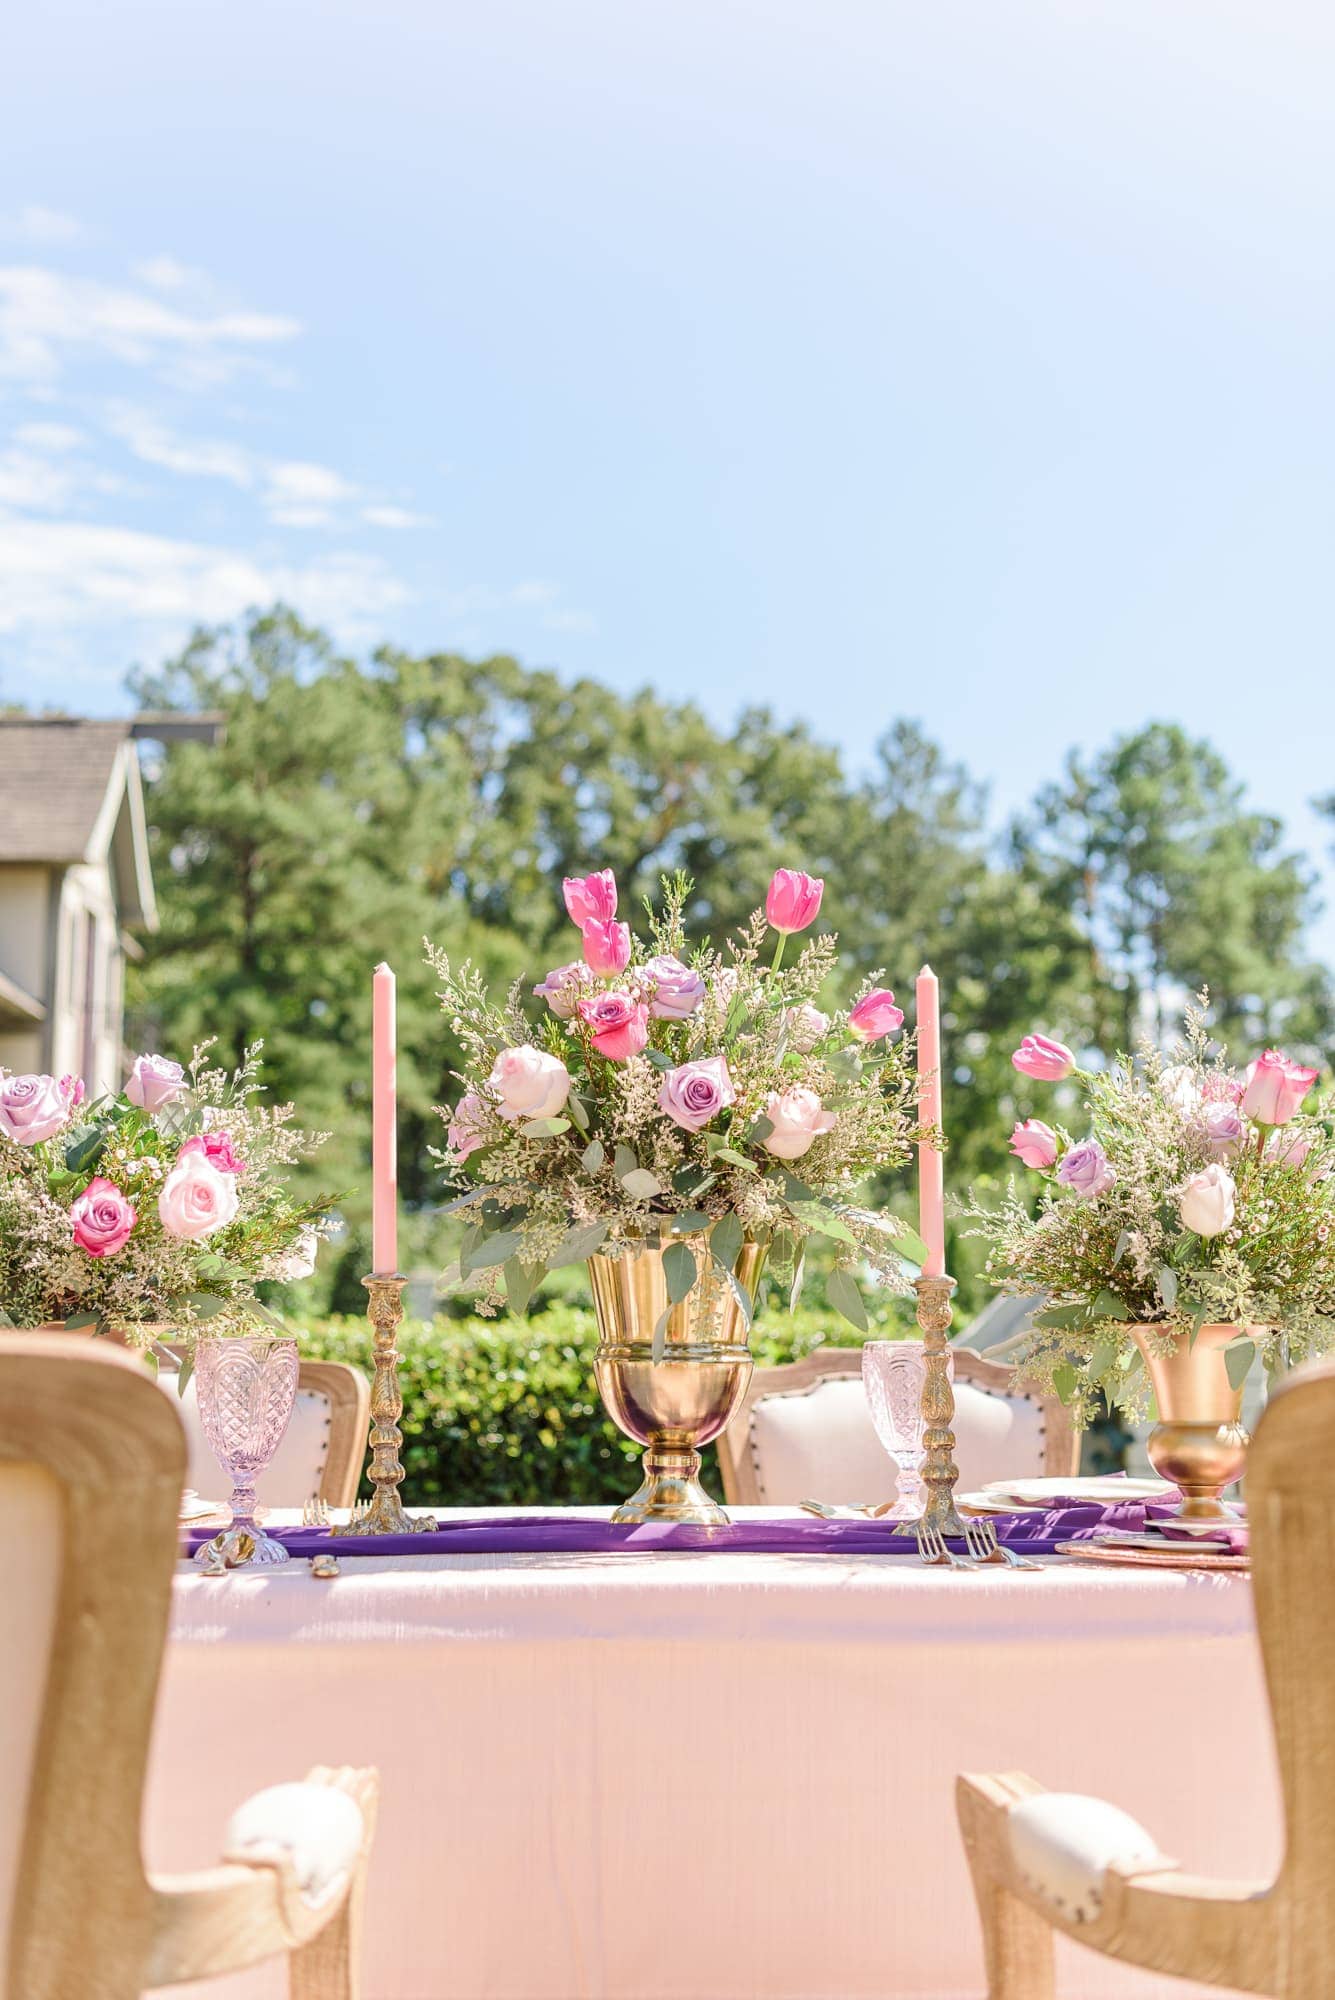 This Key Rose Estate session had pink and purple floral centerpieces placed inside large gold chalices. 